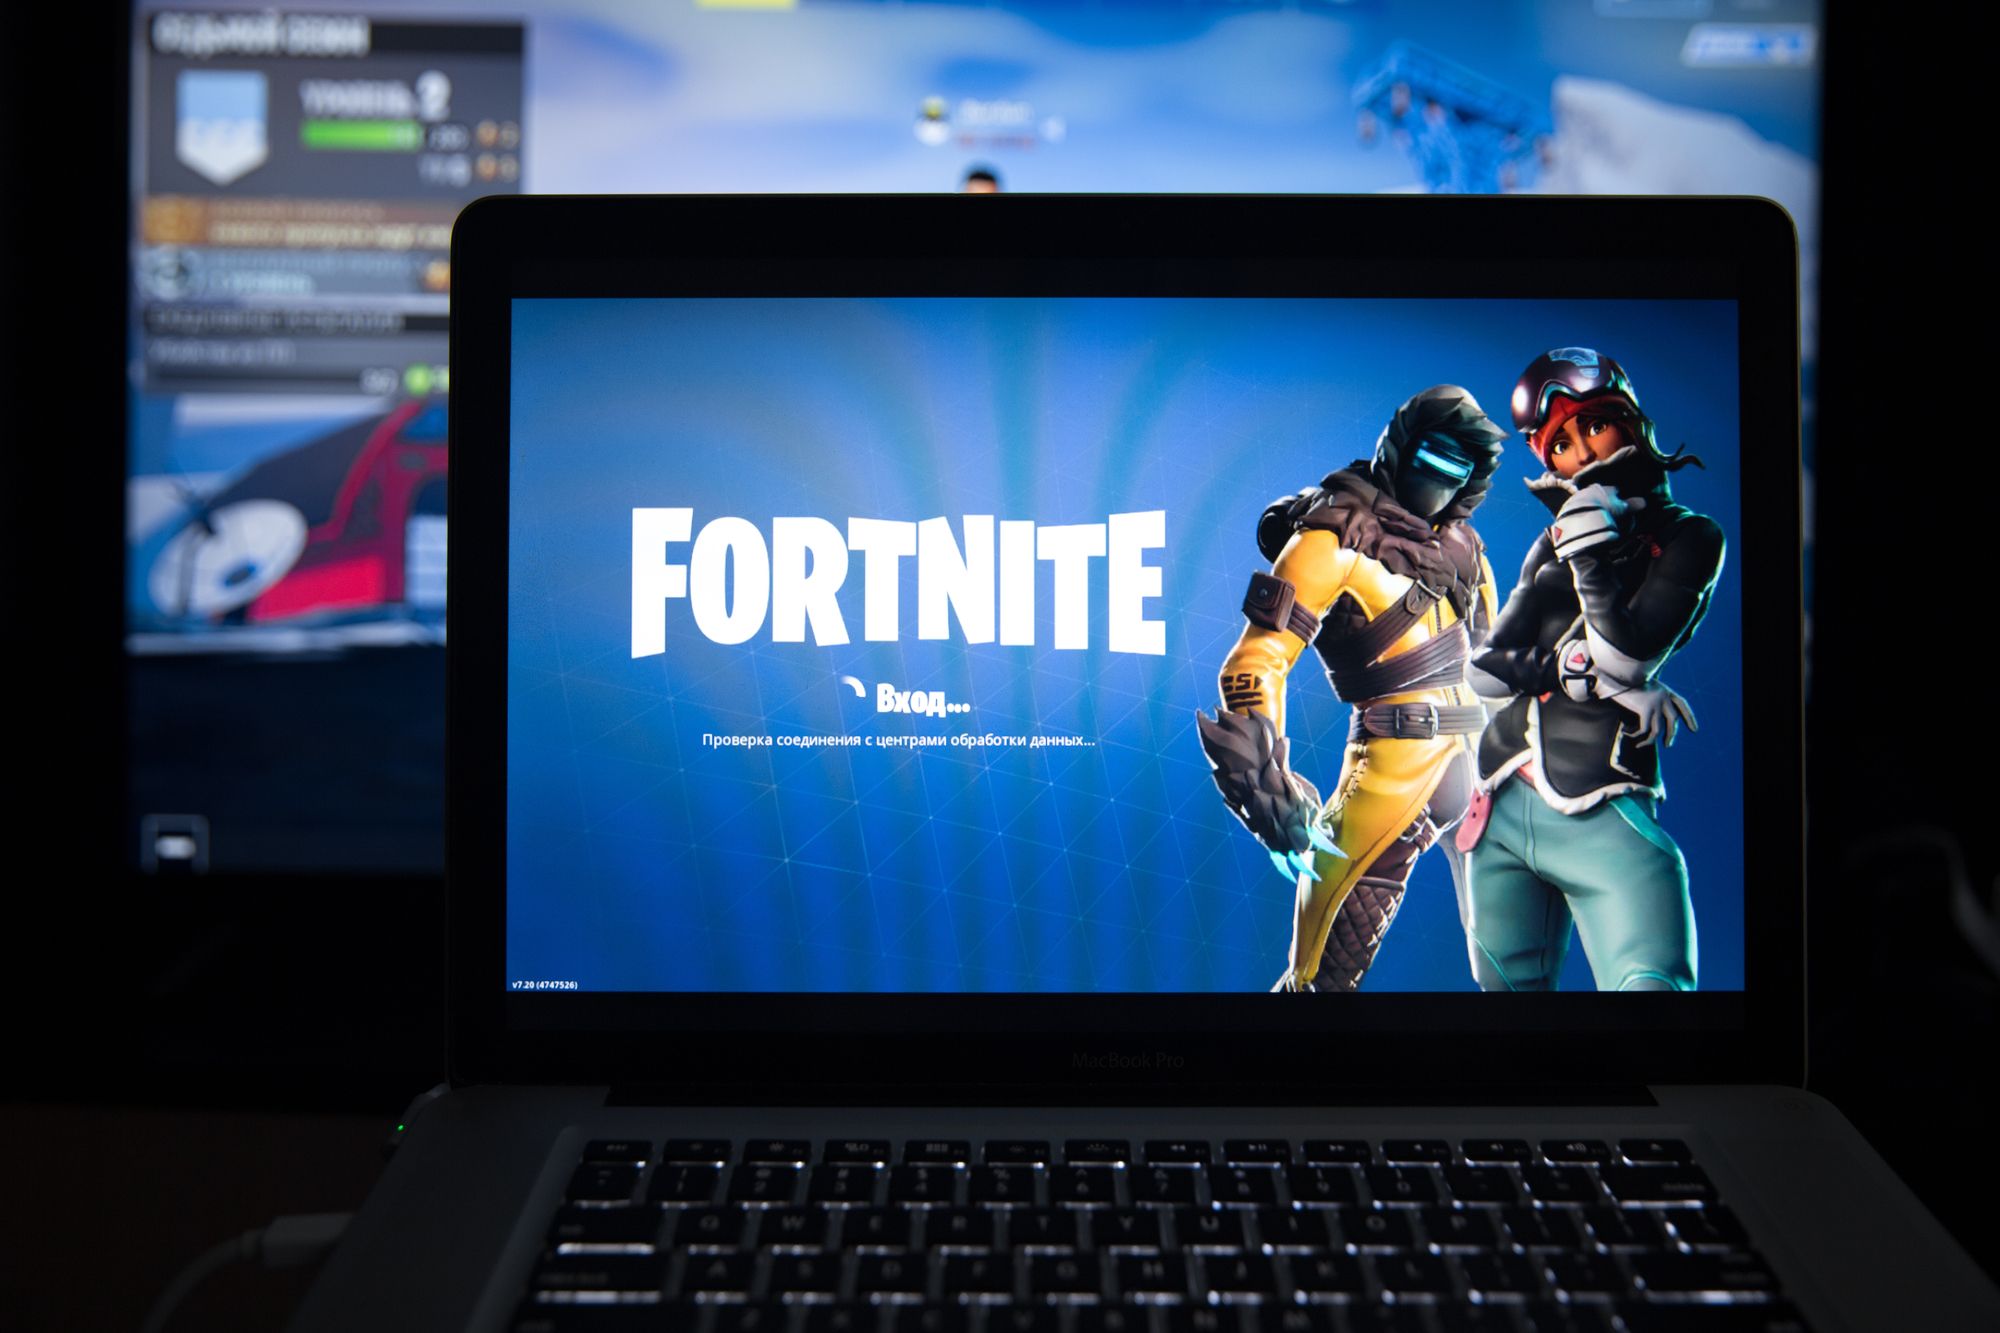 Fortnite is seen on a laptop - epic games class action lawsuit